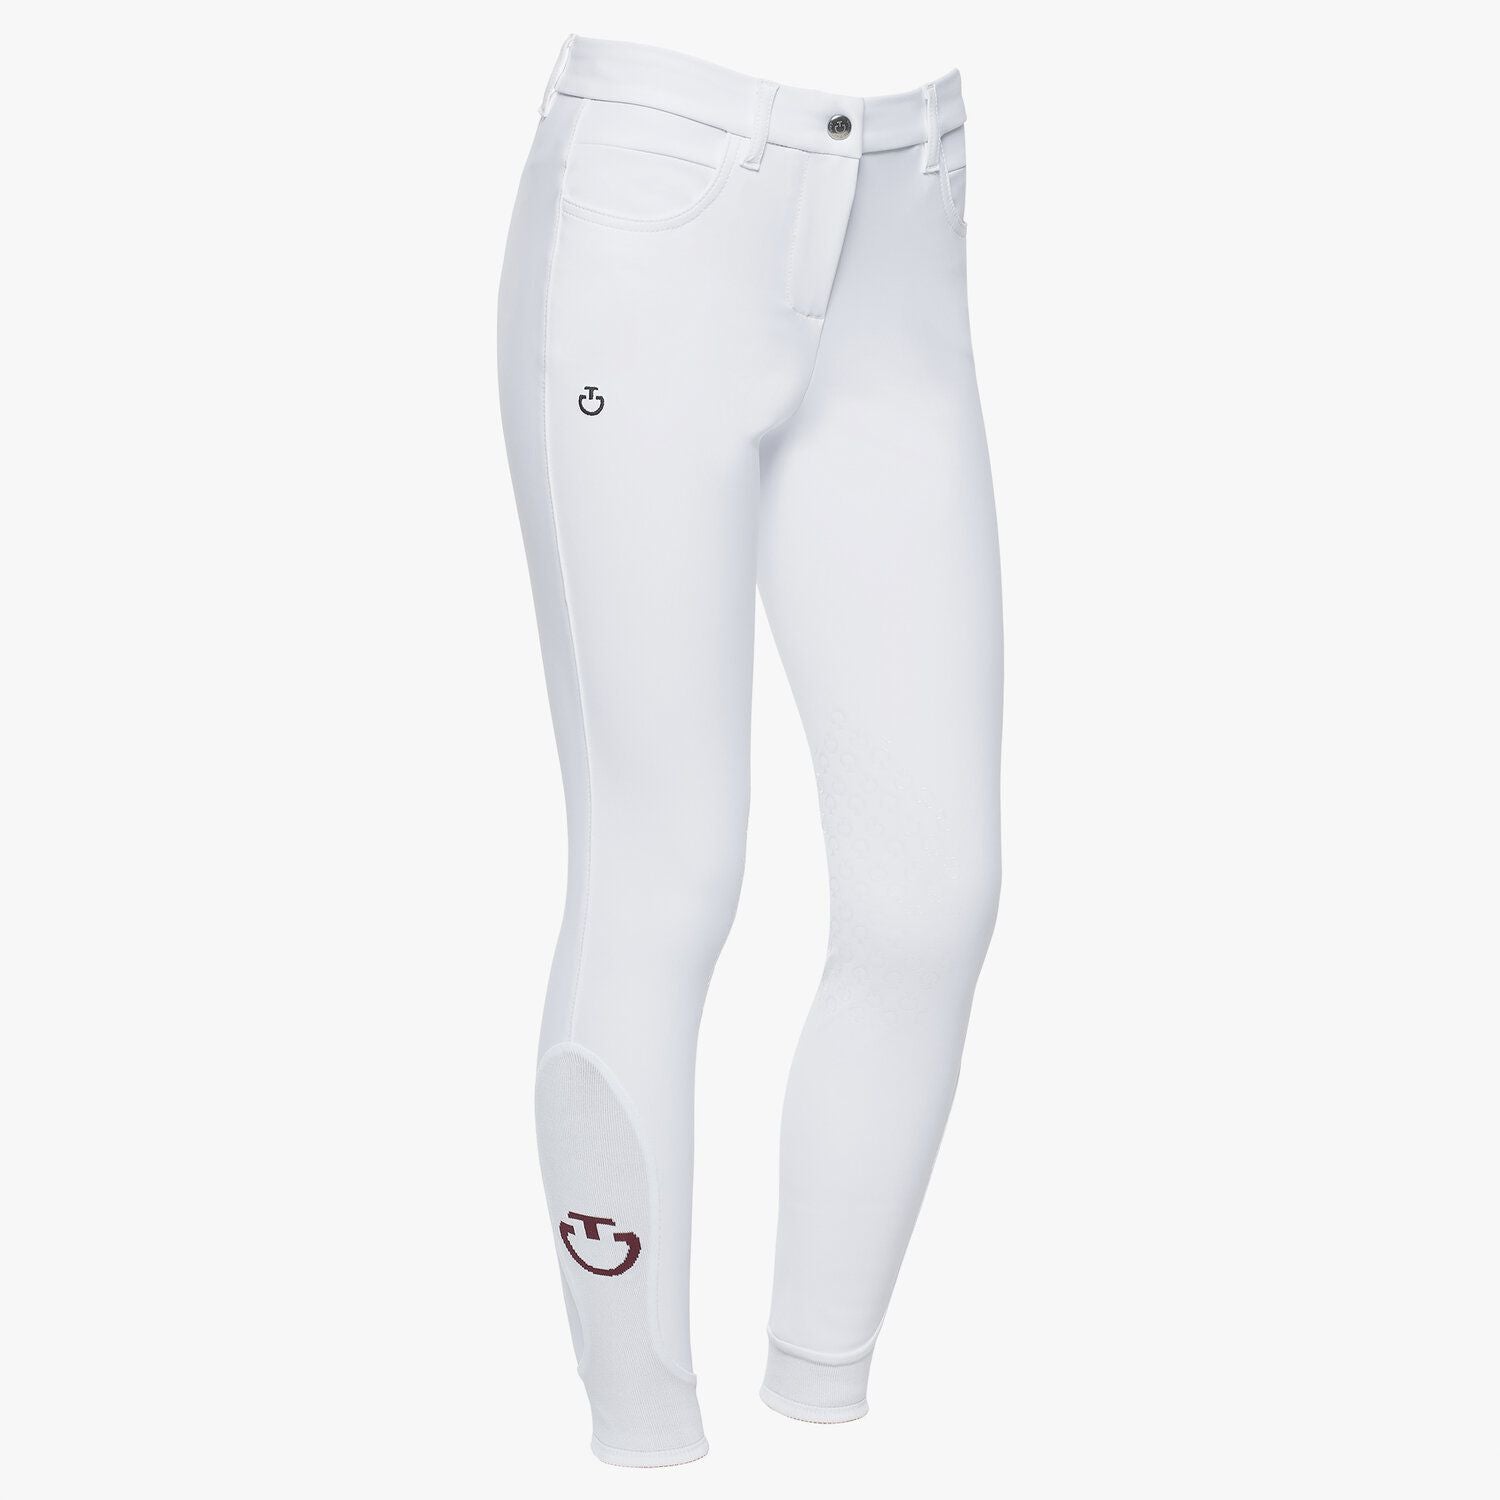 product shot image of the Girls Colour Grip Breeches - White